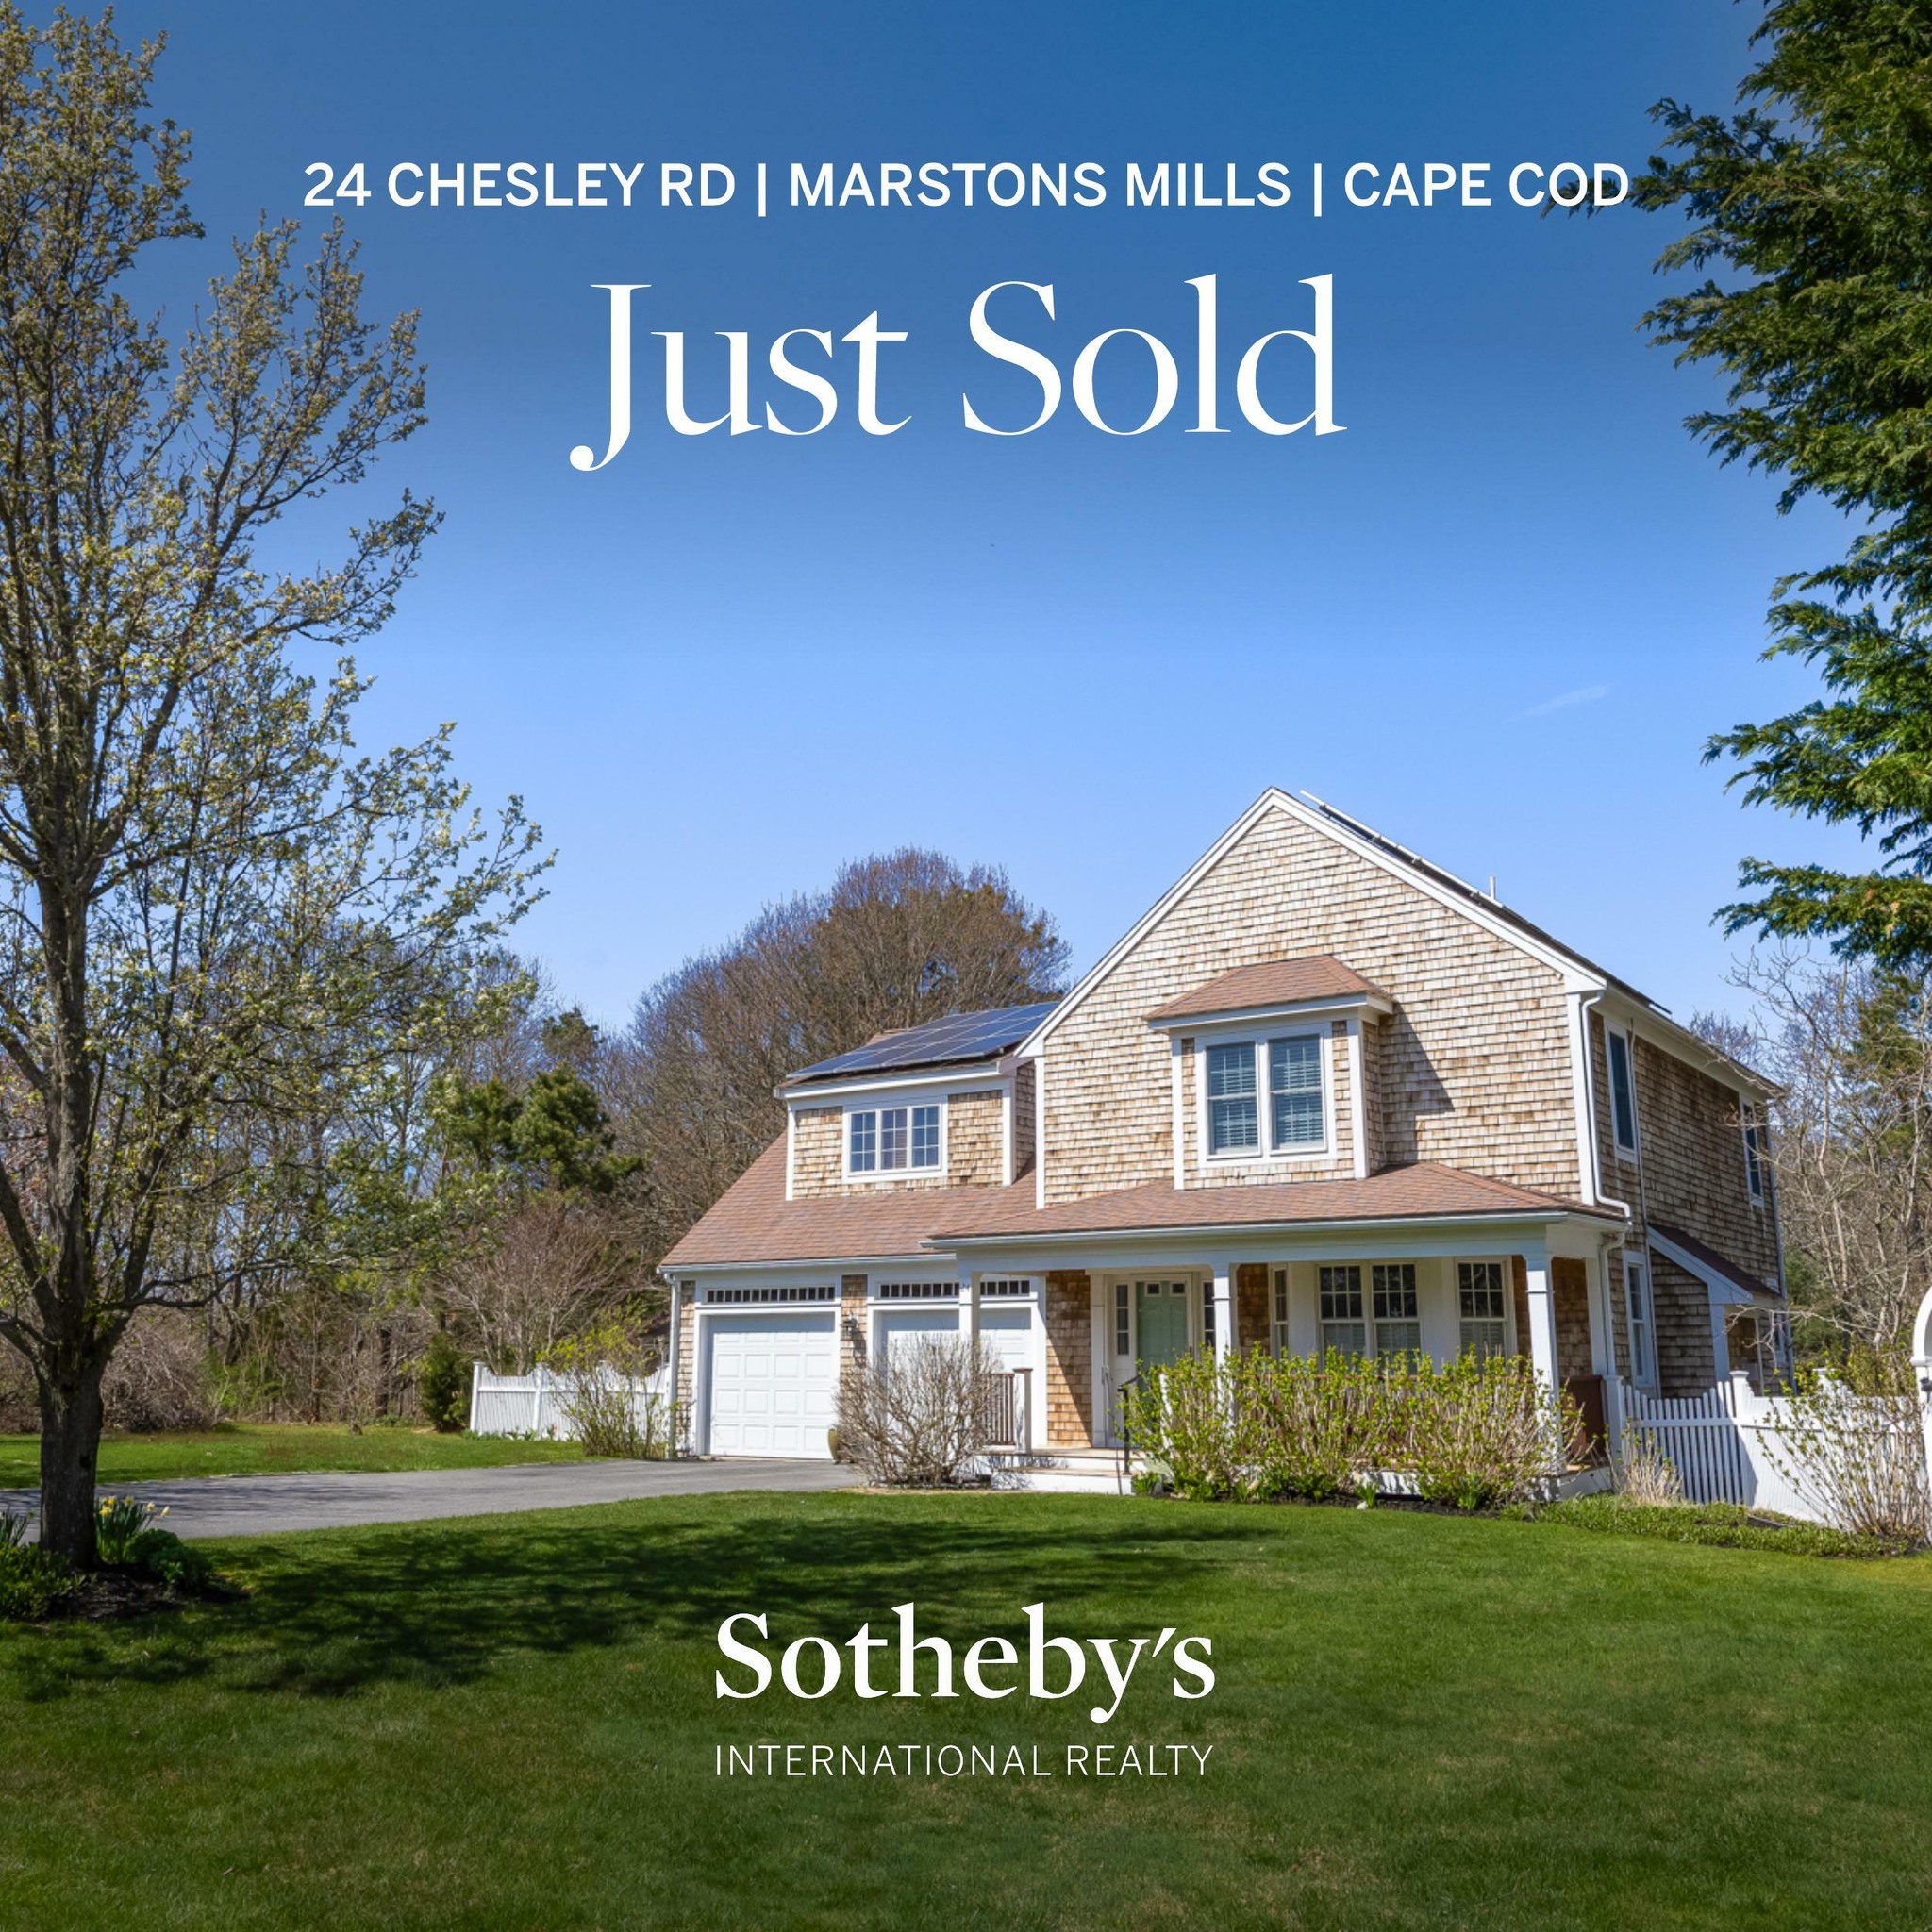 JUST SOLD as the buyer's agent! A huge thank you... - Ryan Mann